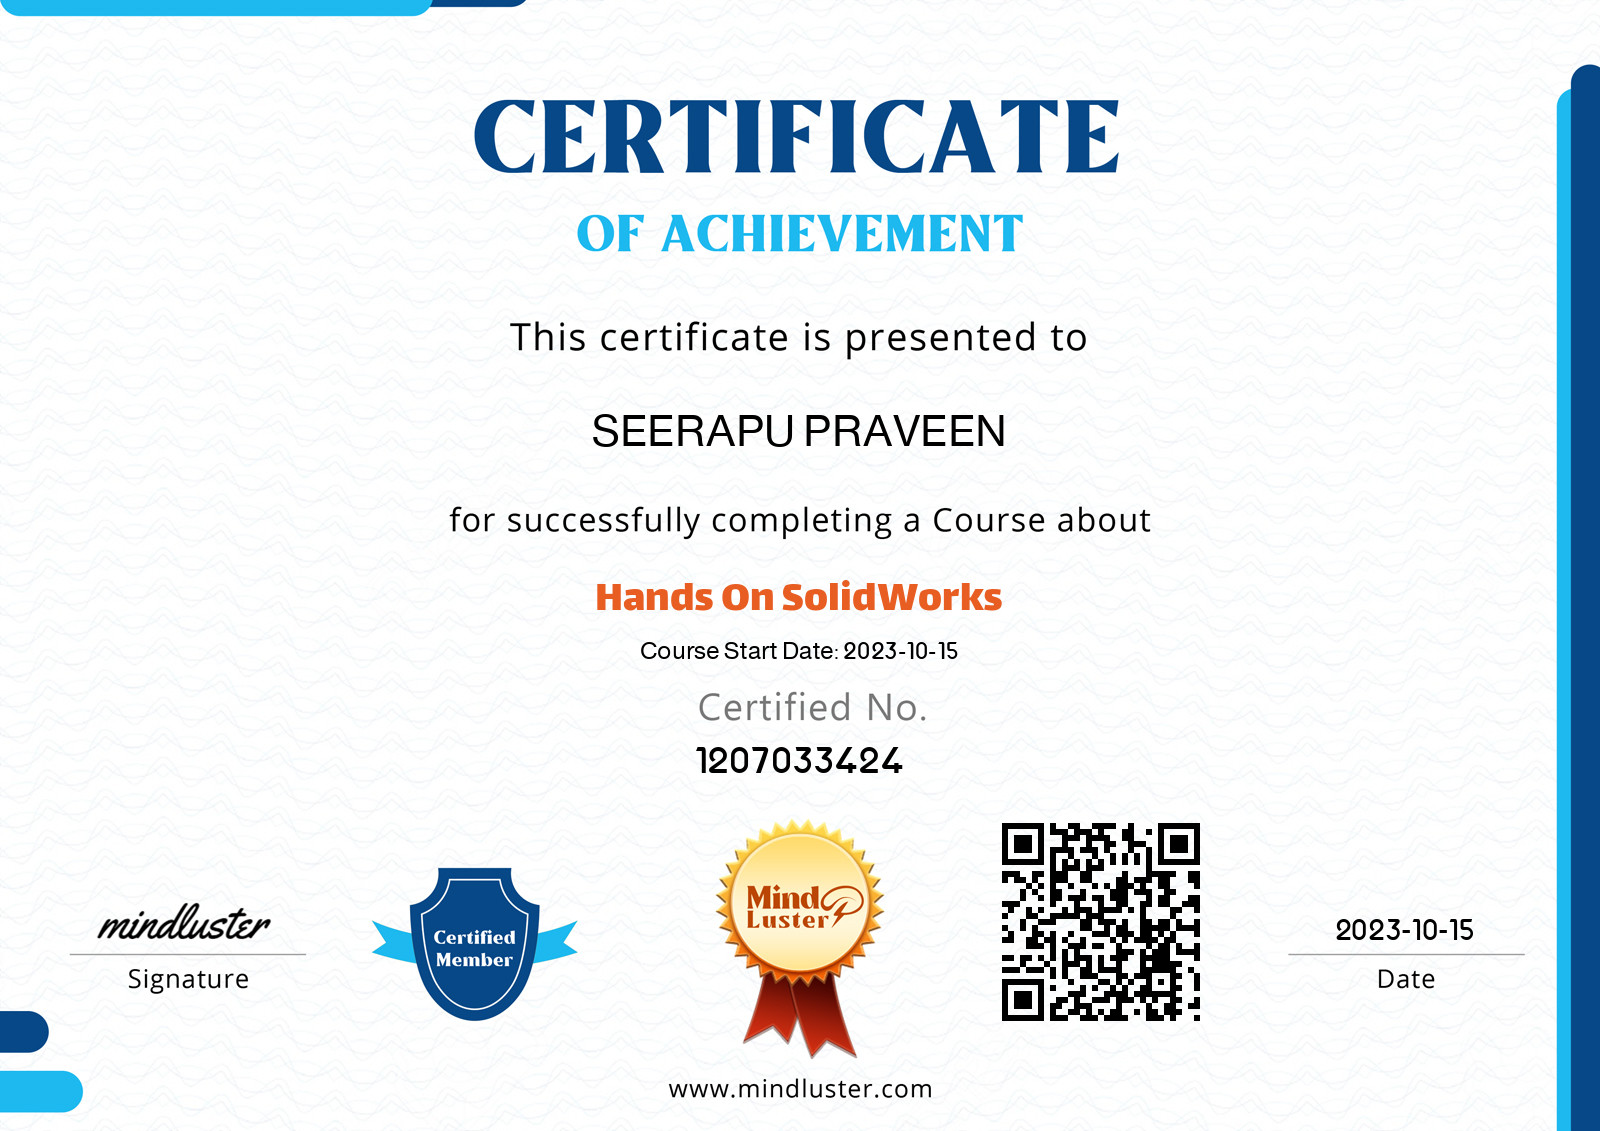 certificate for solidworks